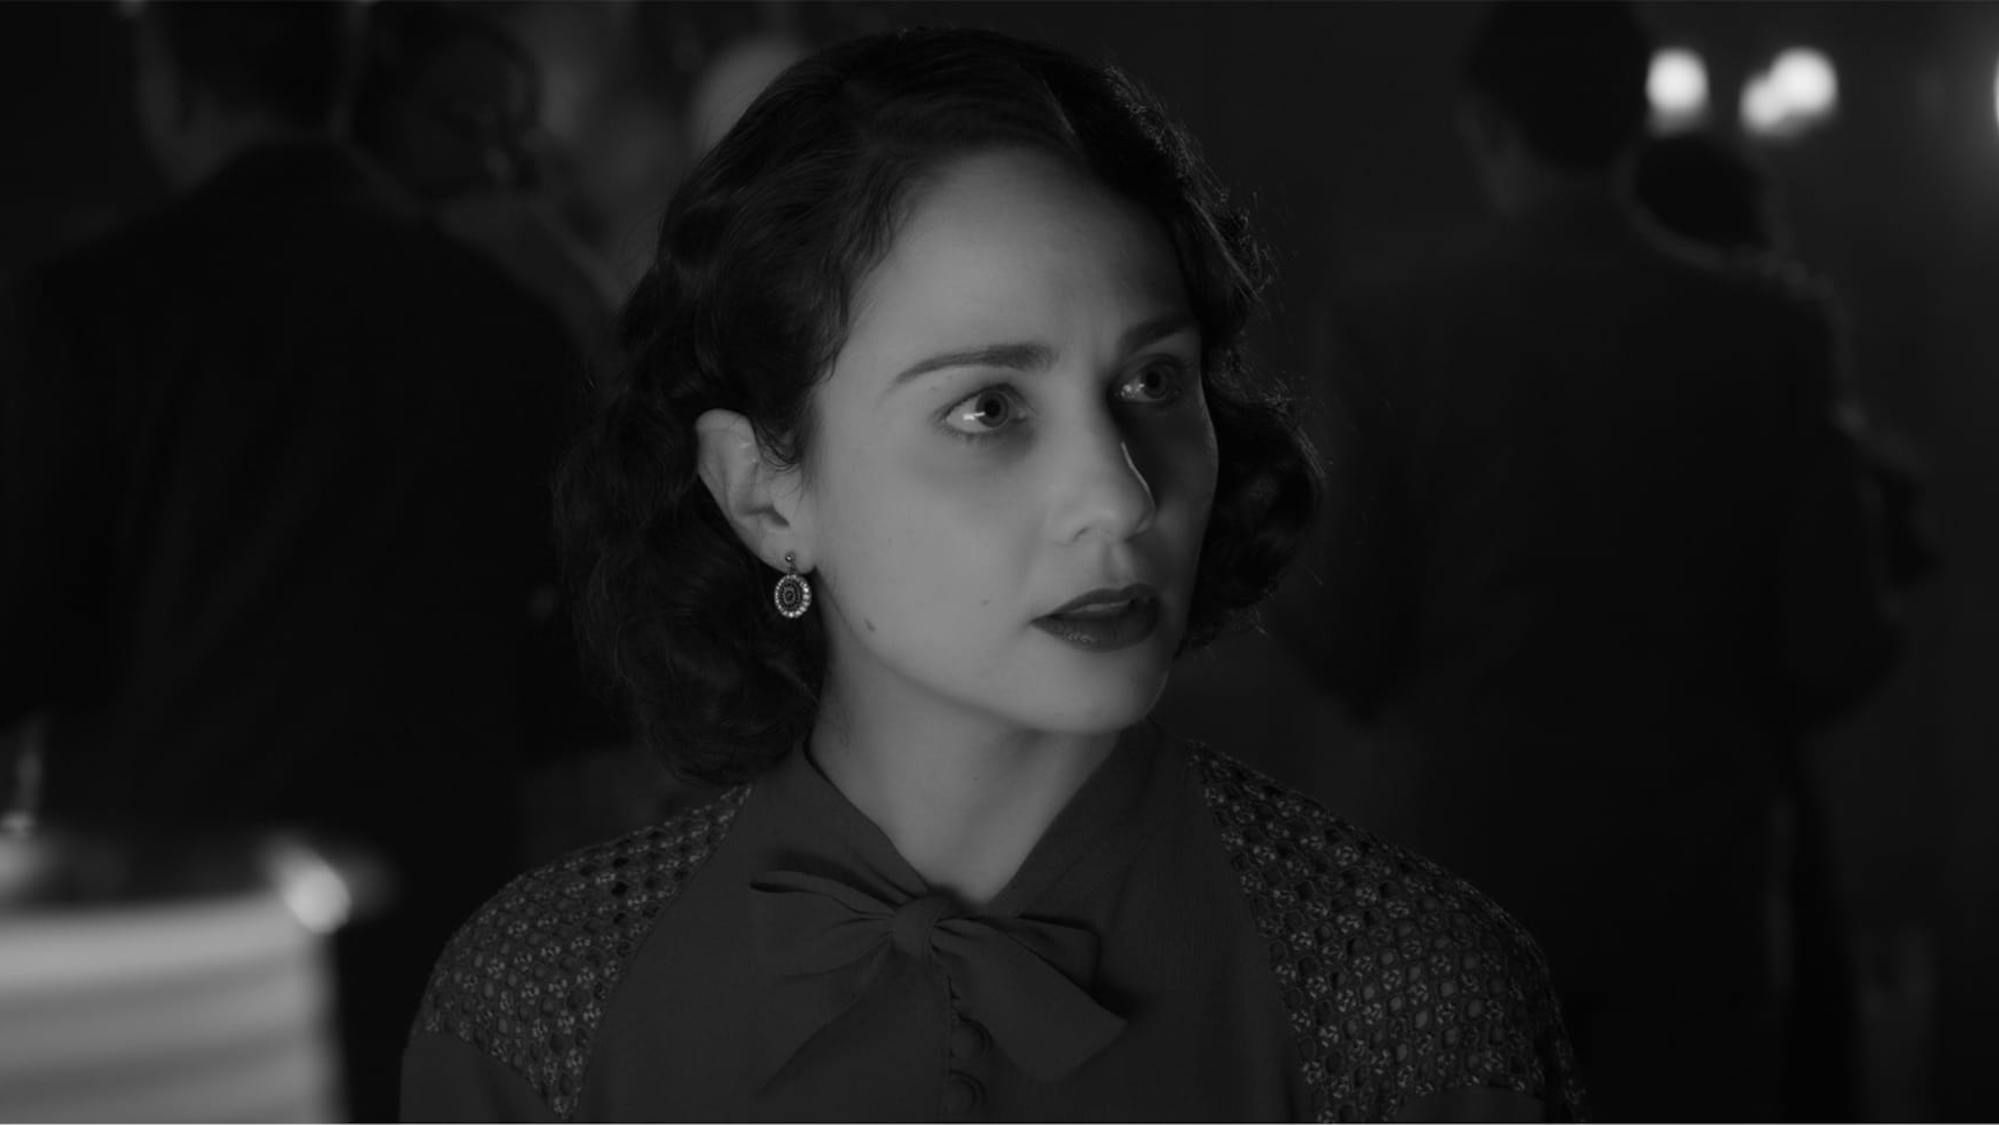 In a shot from the film, we see how the scene above translates to a black-and-white experience. Middleton’s dark hair, red dress, and red lipstick appear in rich shades of gray and black. 